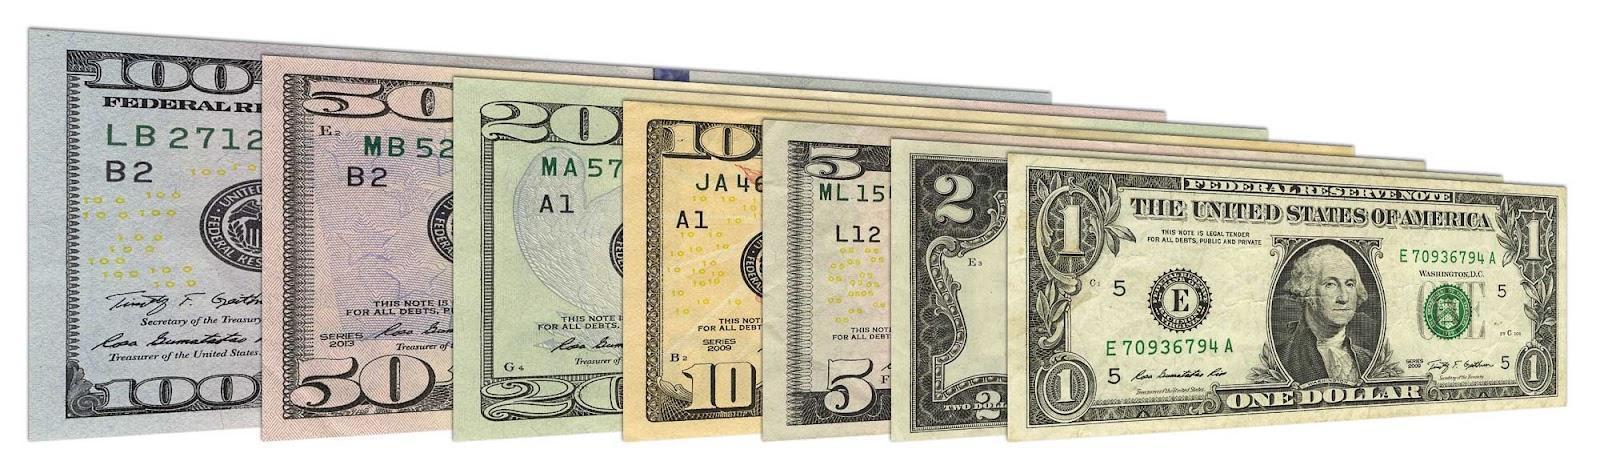 50 US Dollars (USD) to Jamaican Dollars (JMD) - Currency Converter